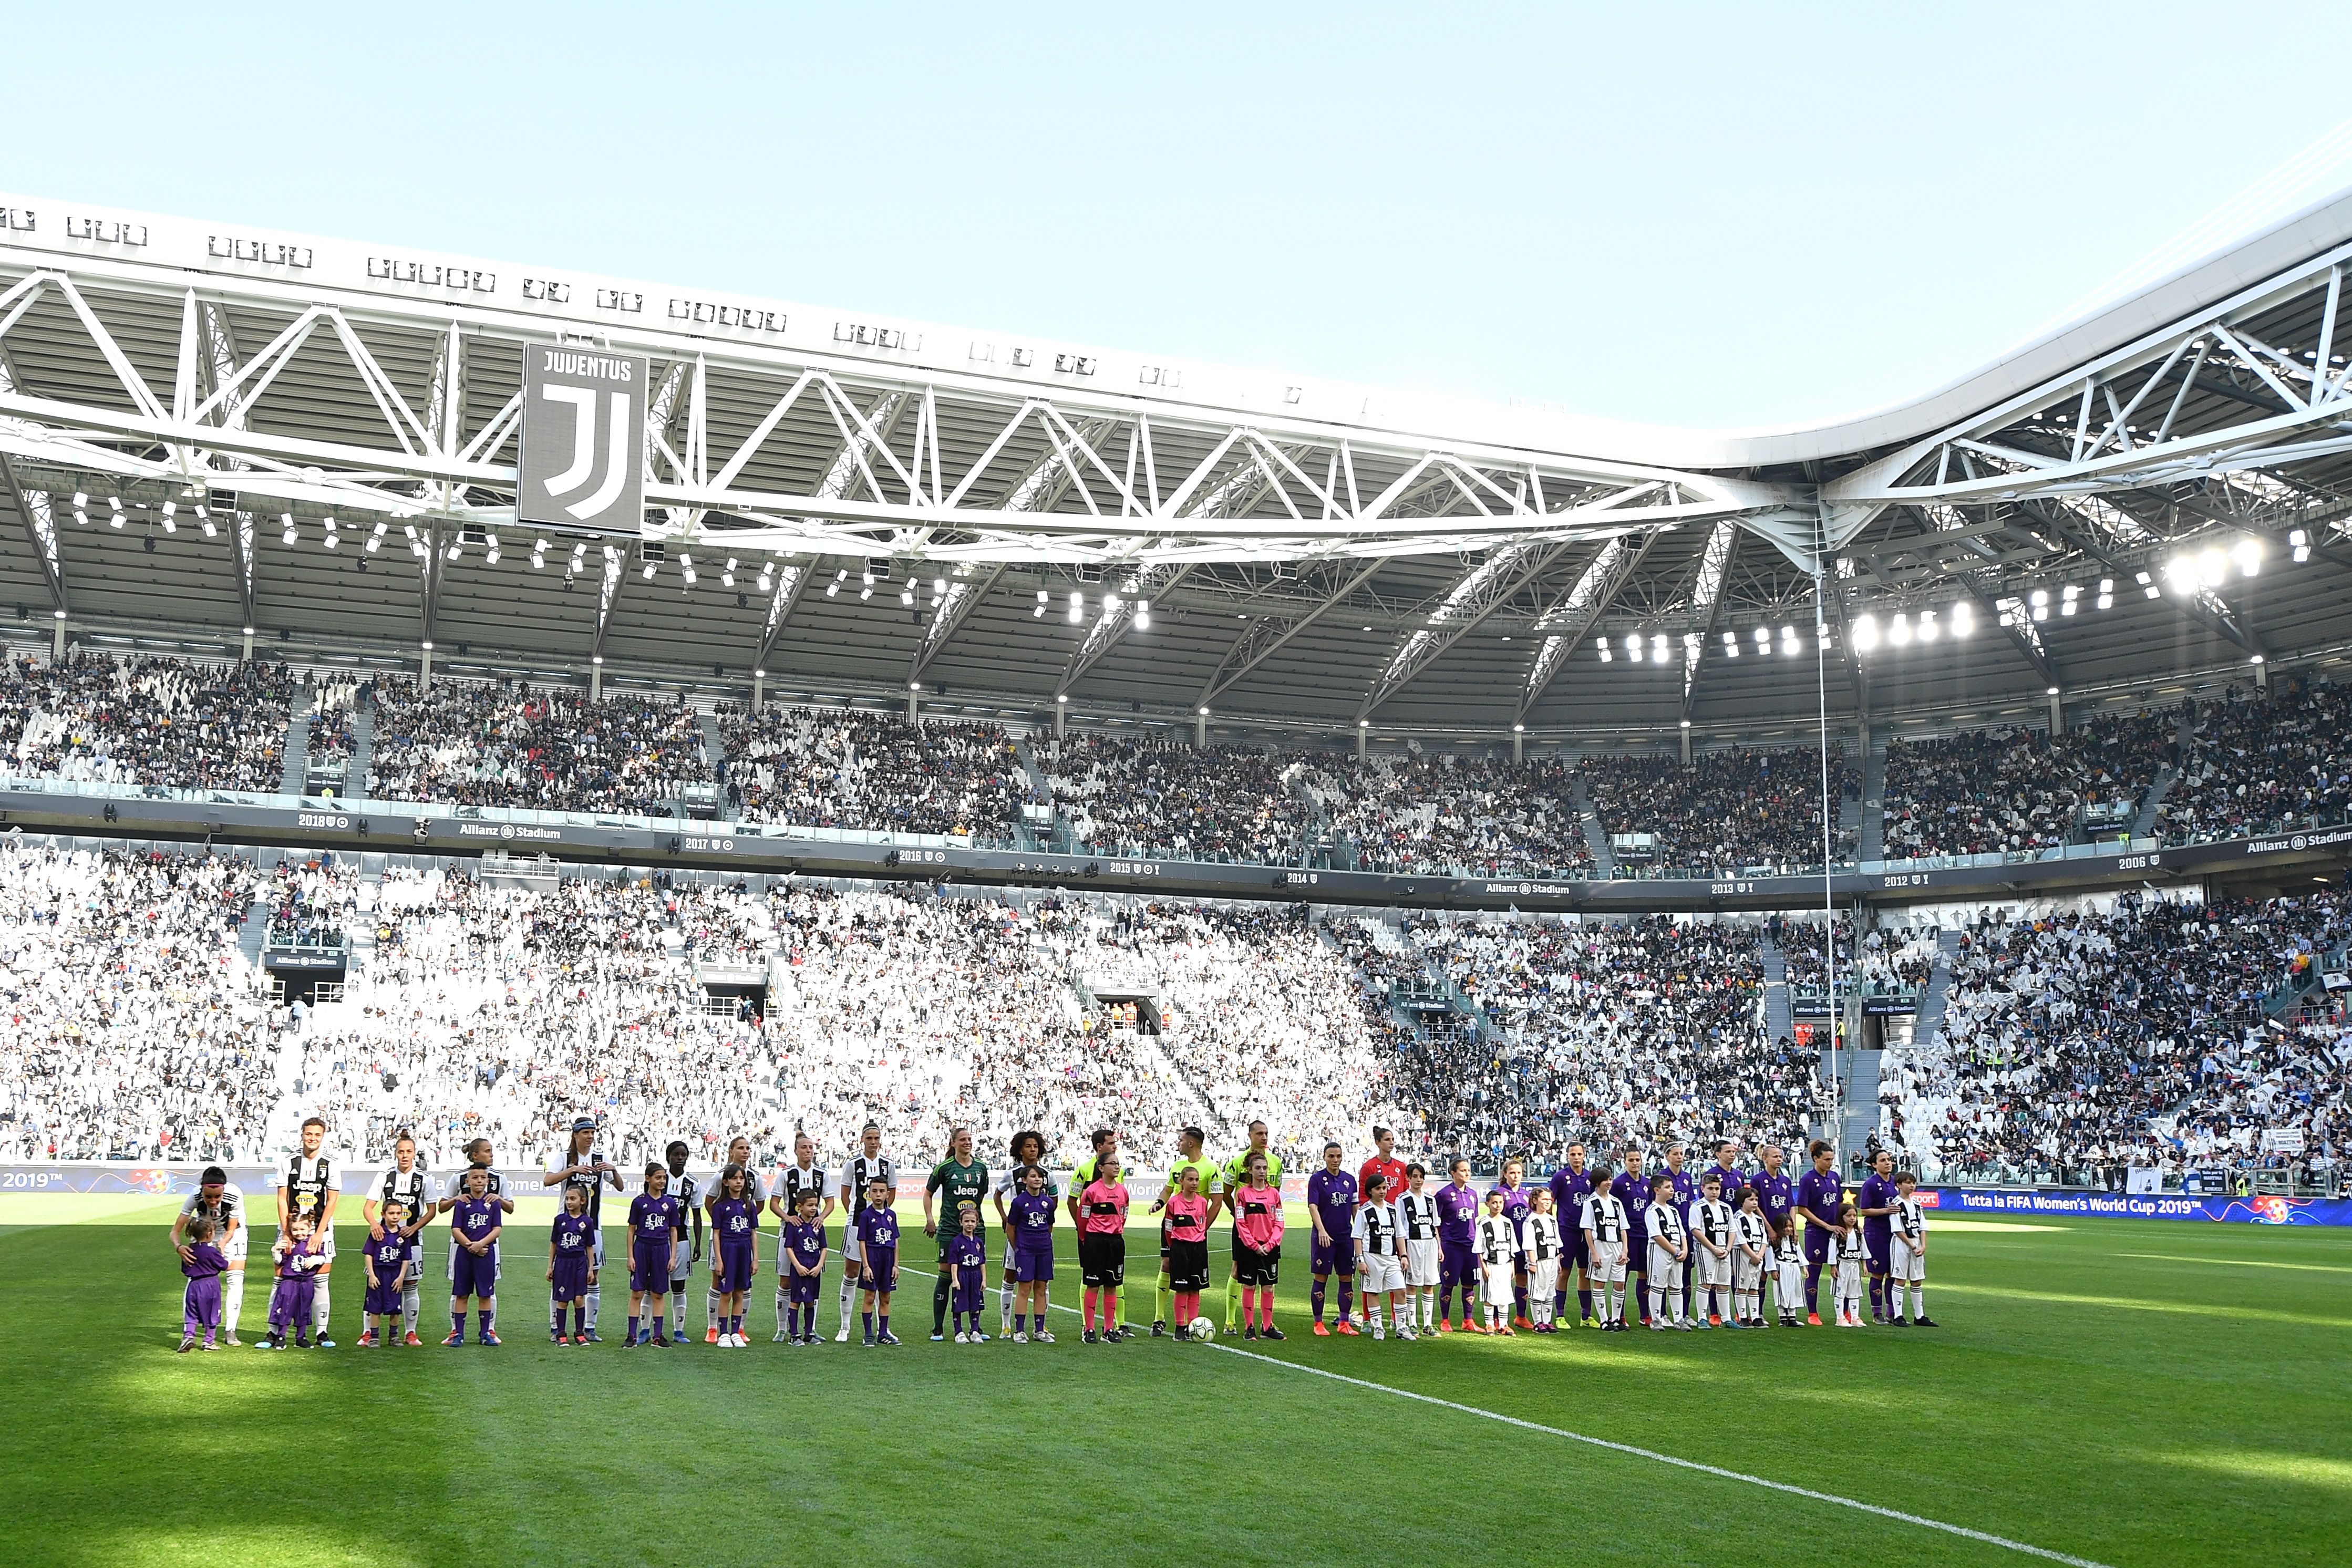 Juventus Women beat Fiorentina, set Serie A record with 18th straight win -  Black & White & Read All Over